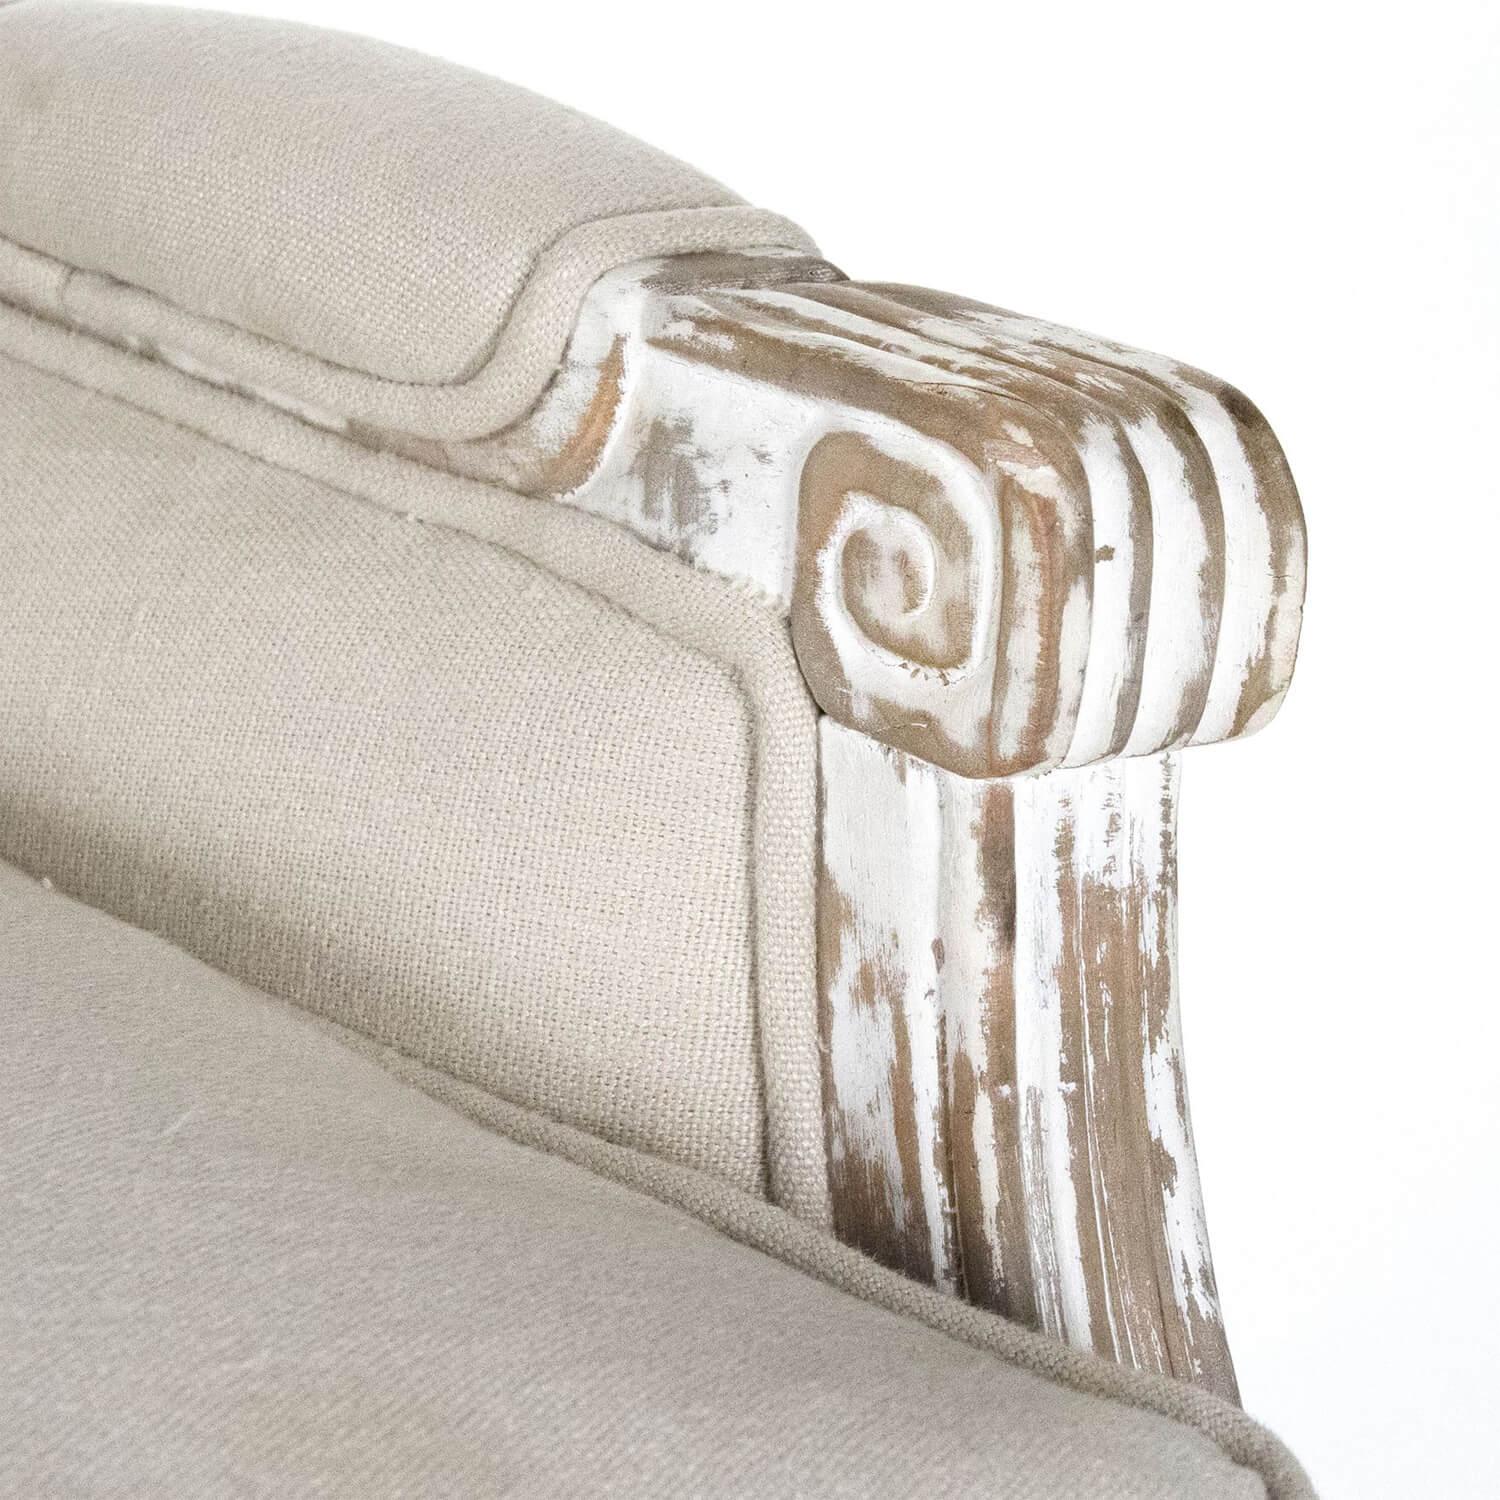 Distressed French Chic Settee - Belle Escape